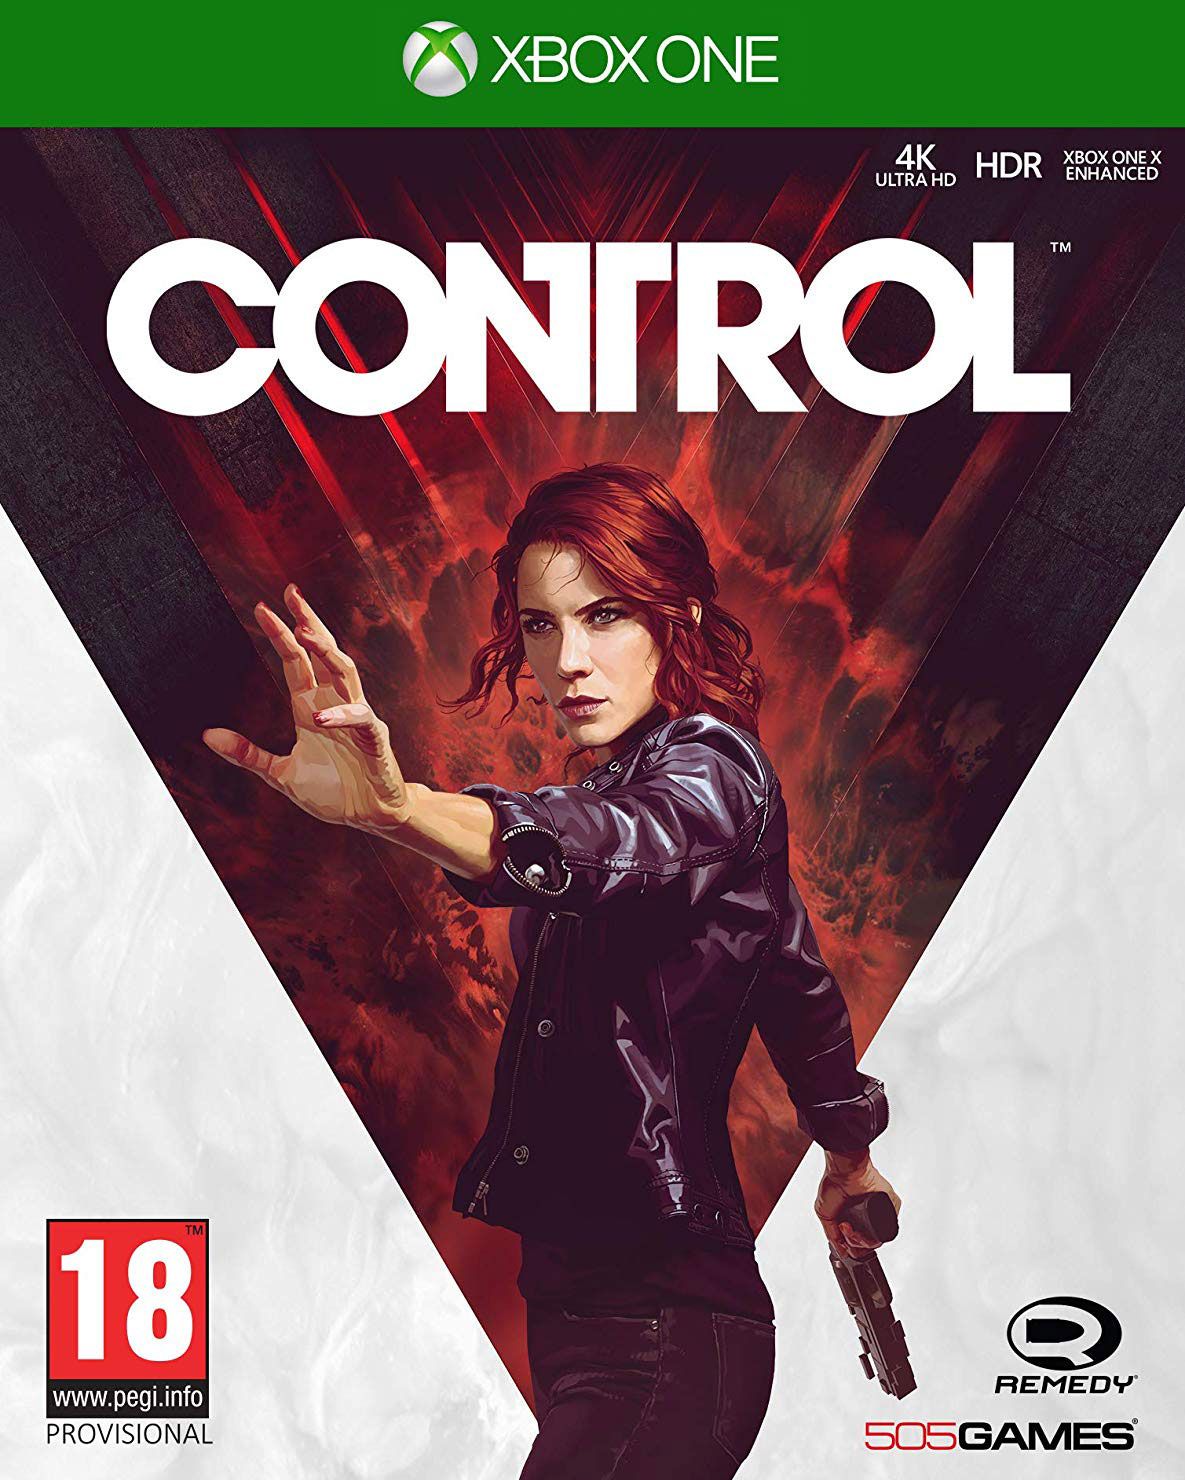 Control (Xbox One)(Pwned) | Buy from Pwned Games with confidence